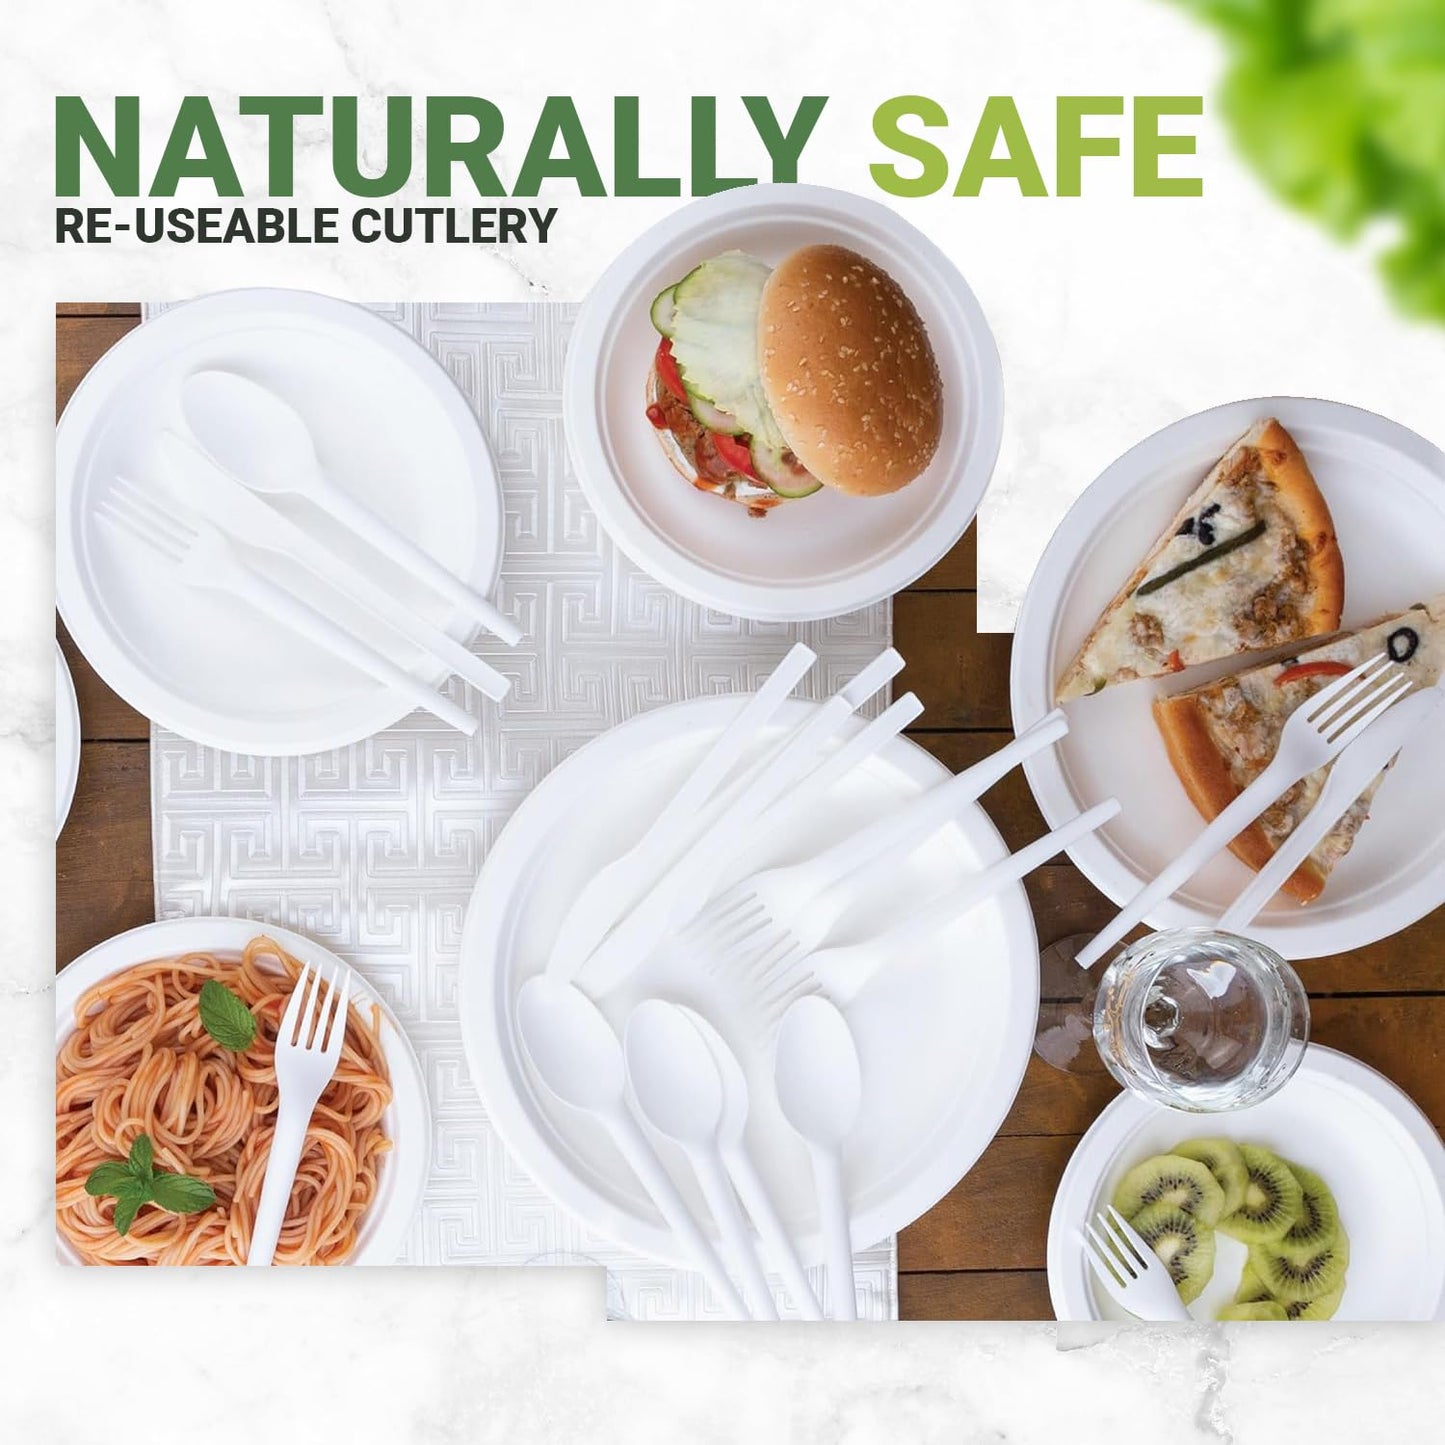 250 Pieces Compostable Utensil Set, 50 Large, 50 Small Biodegradable Paper Plates with 60 Forks, 60 Spoons, 60 Knives, Plastic Alternative Cutlery